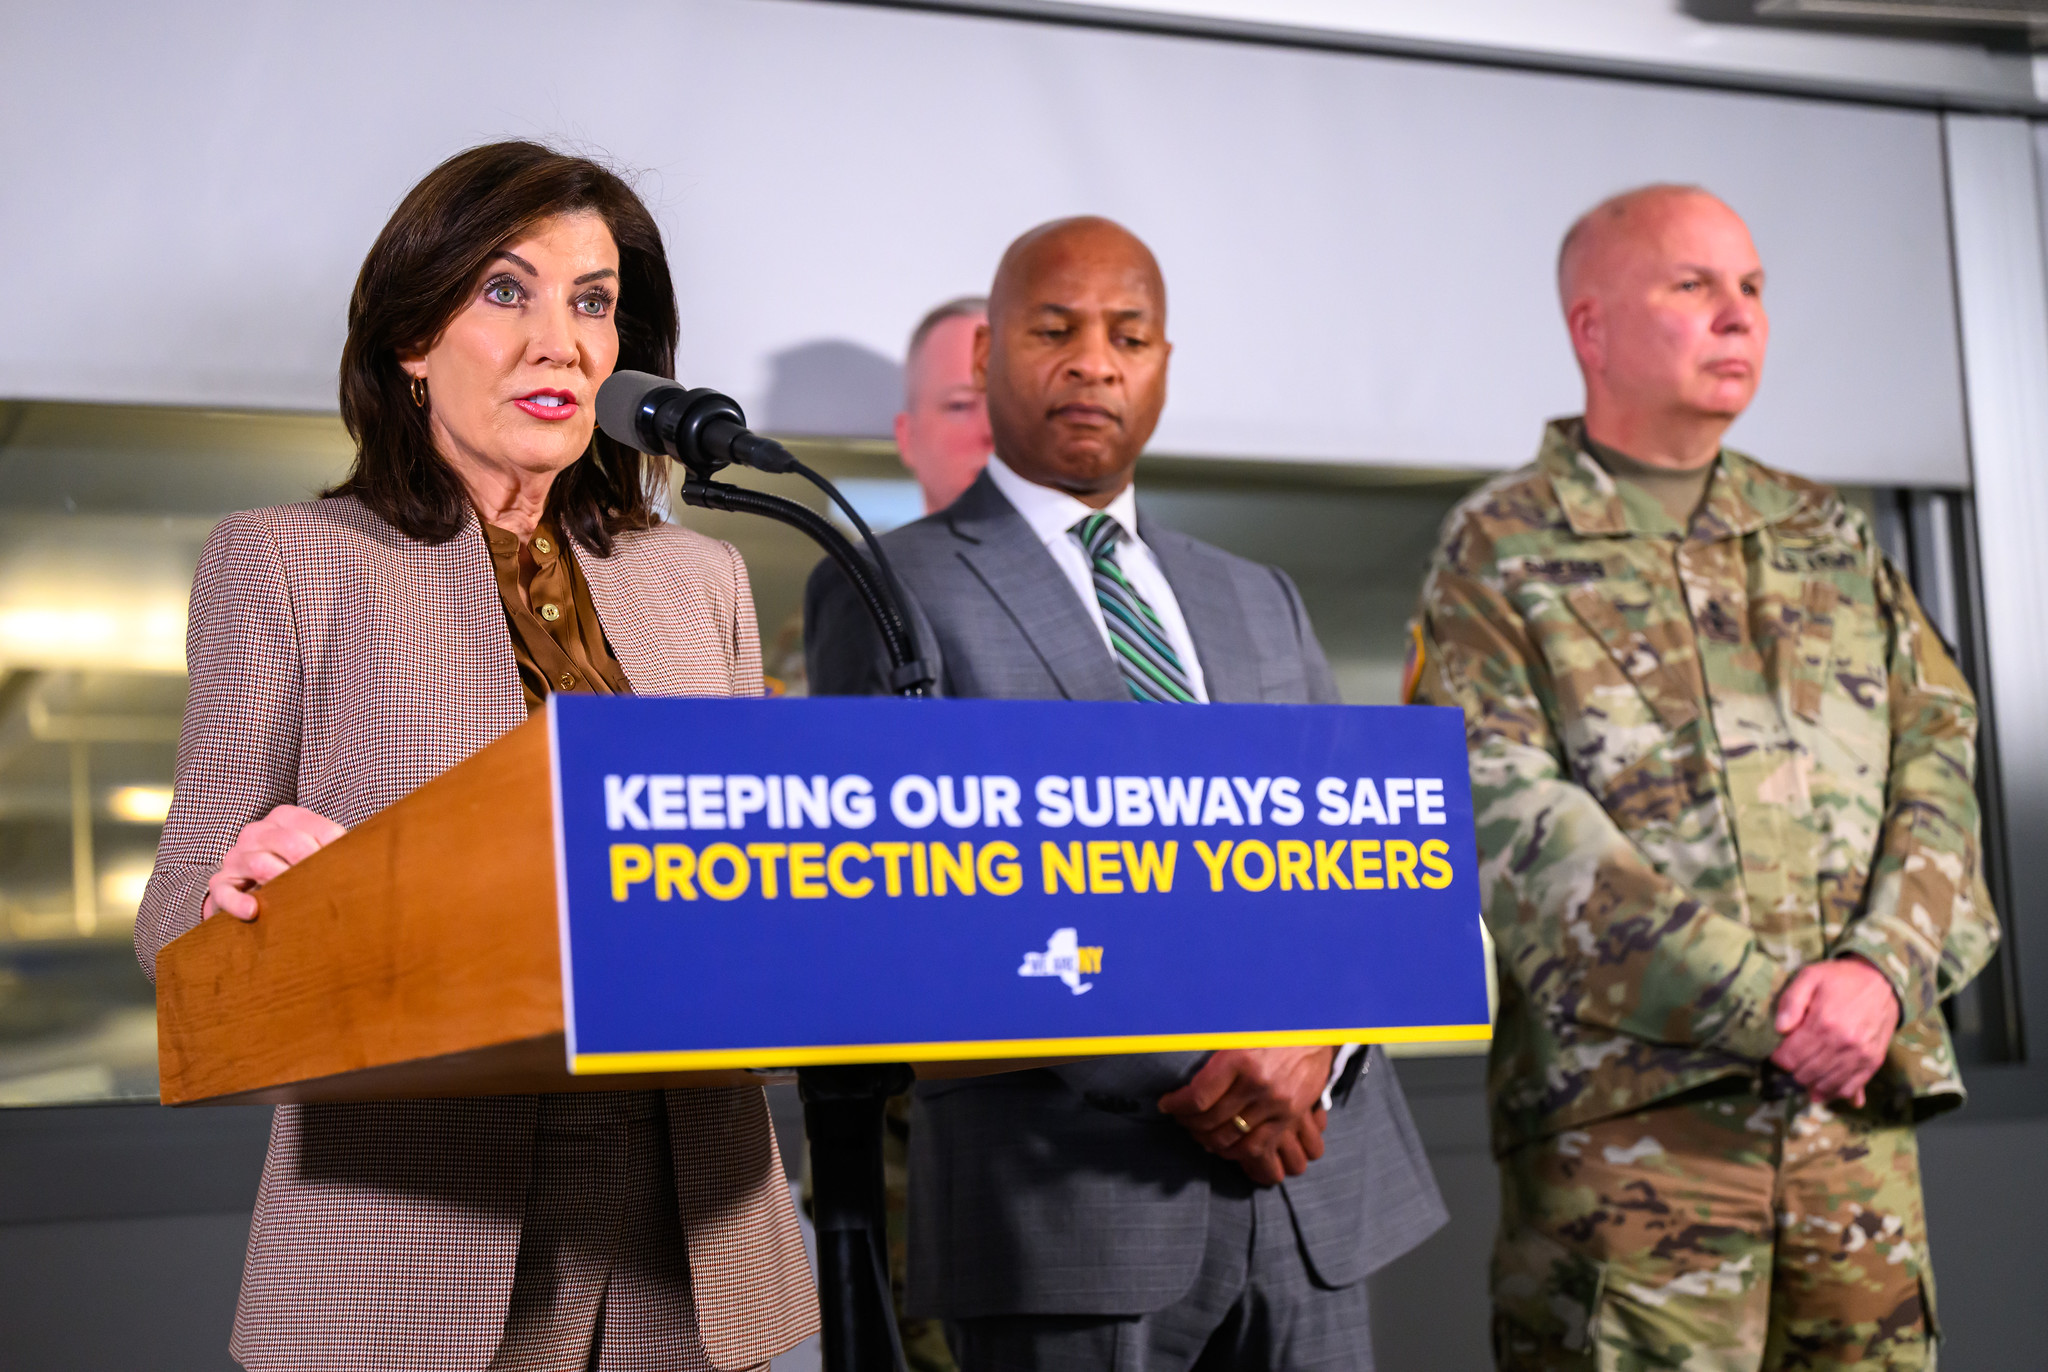 Governor Kathy Hochul stands at a podium that says "Keeping our subways safe protecting New Yorkers"